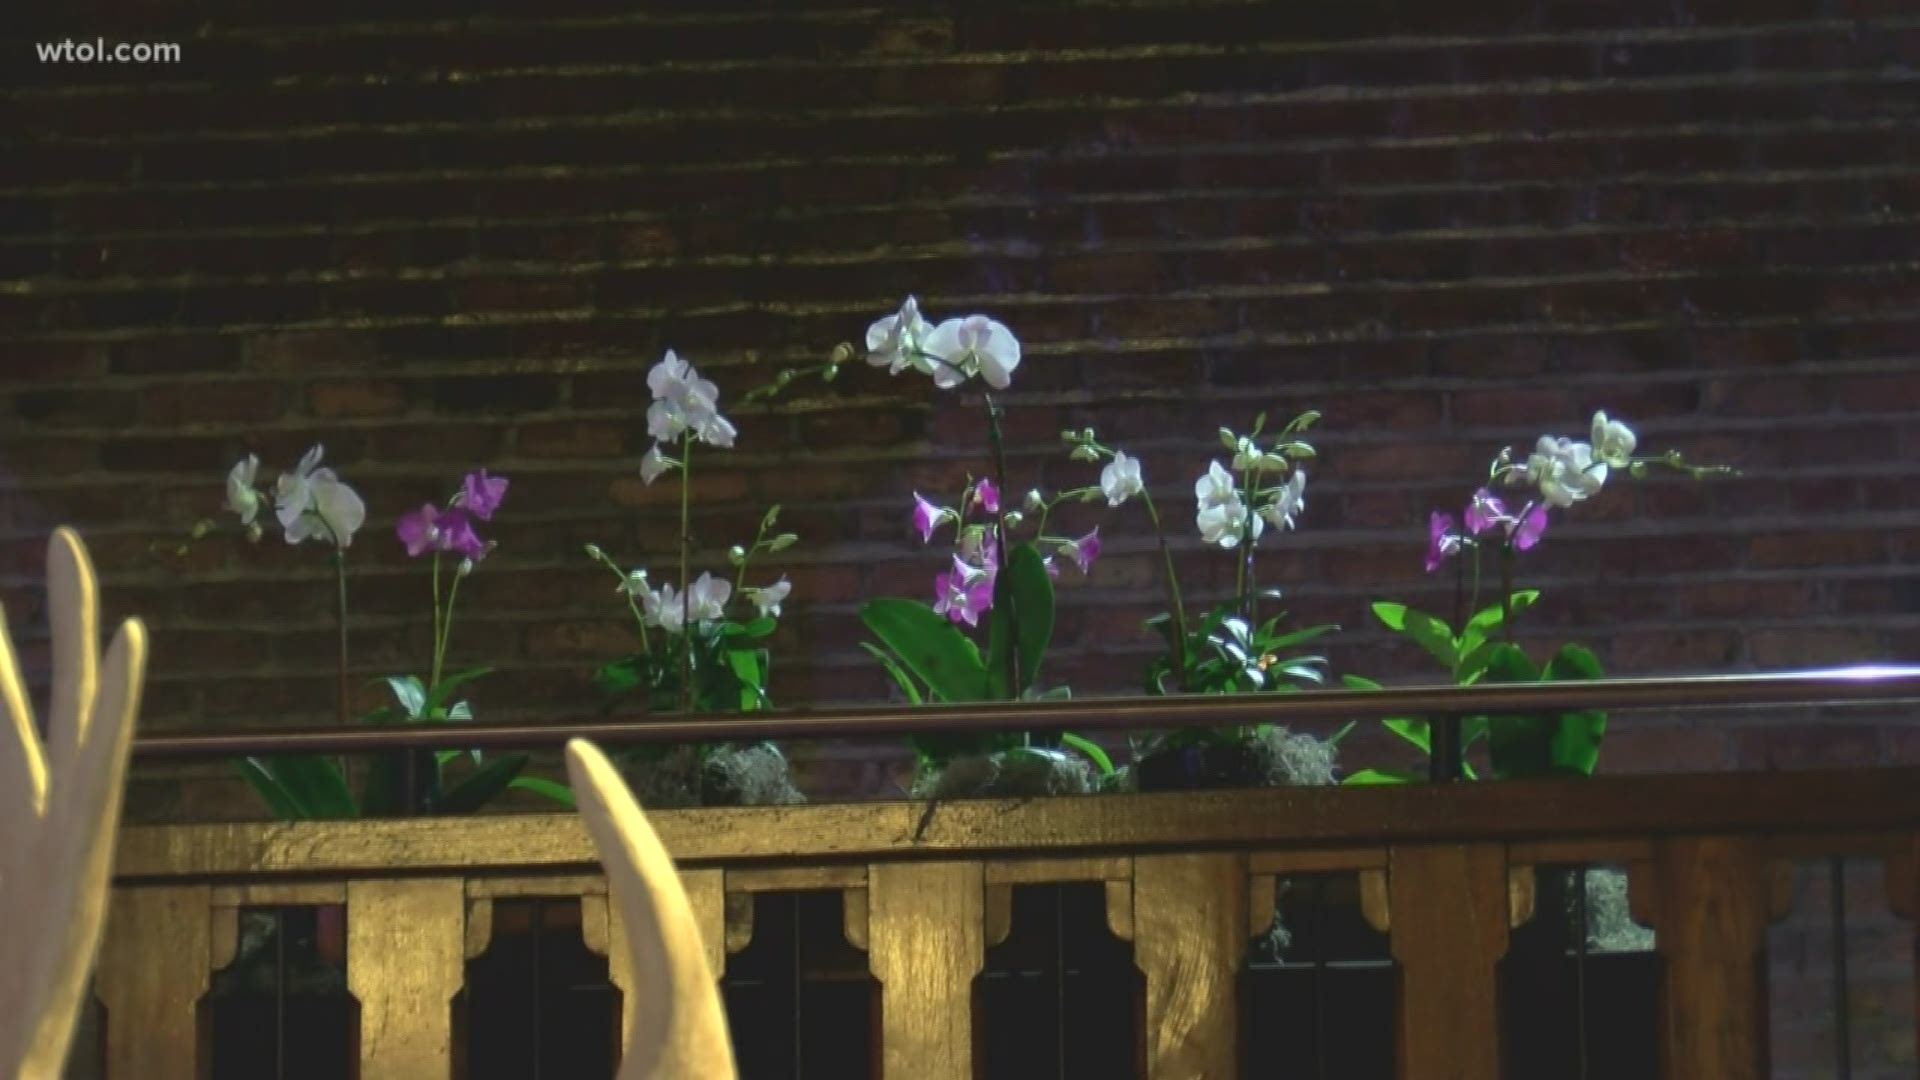 Spring may seem like far away, but you can still enjoy some beautiful flowers at the Toledo Zoo Orchid Show!